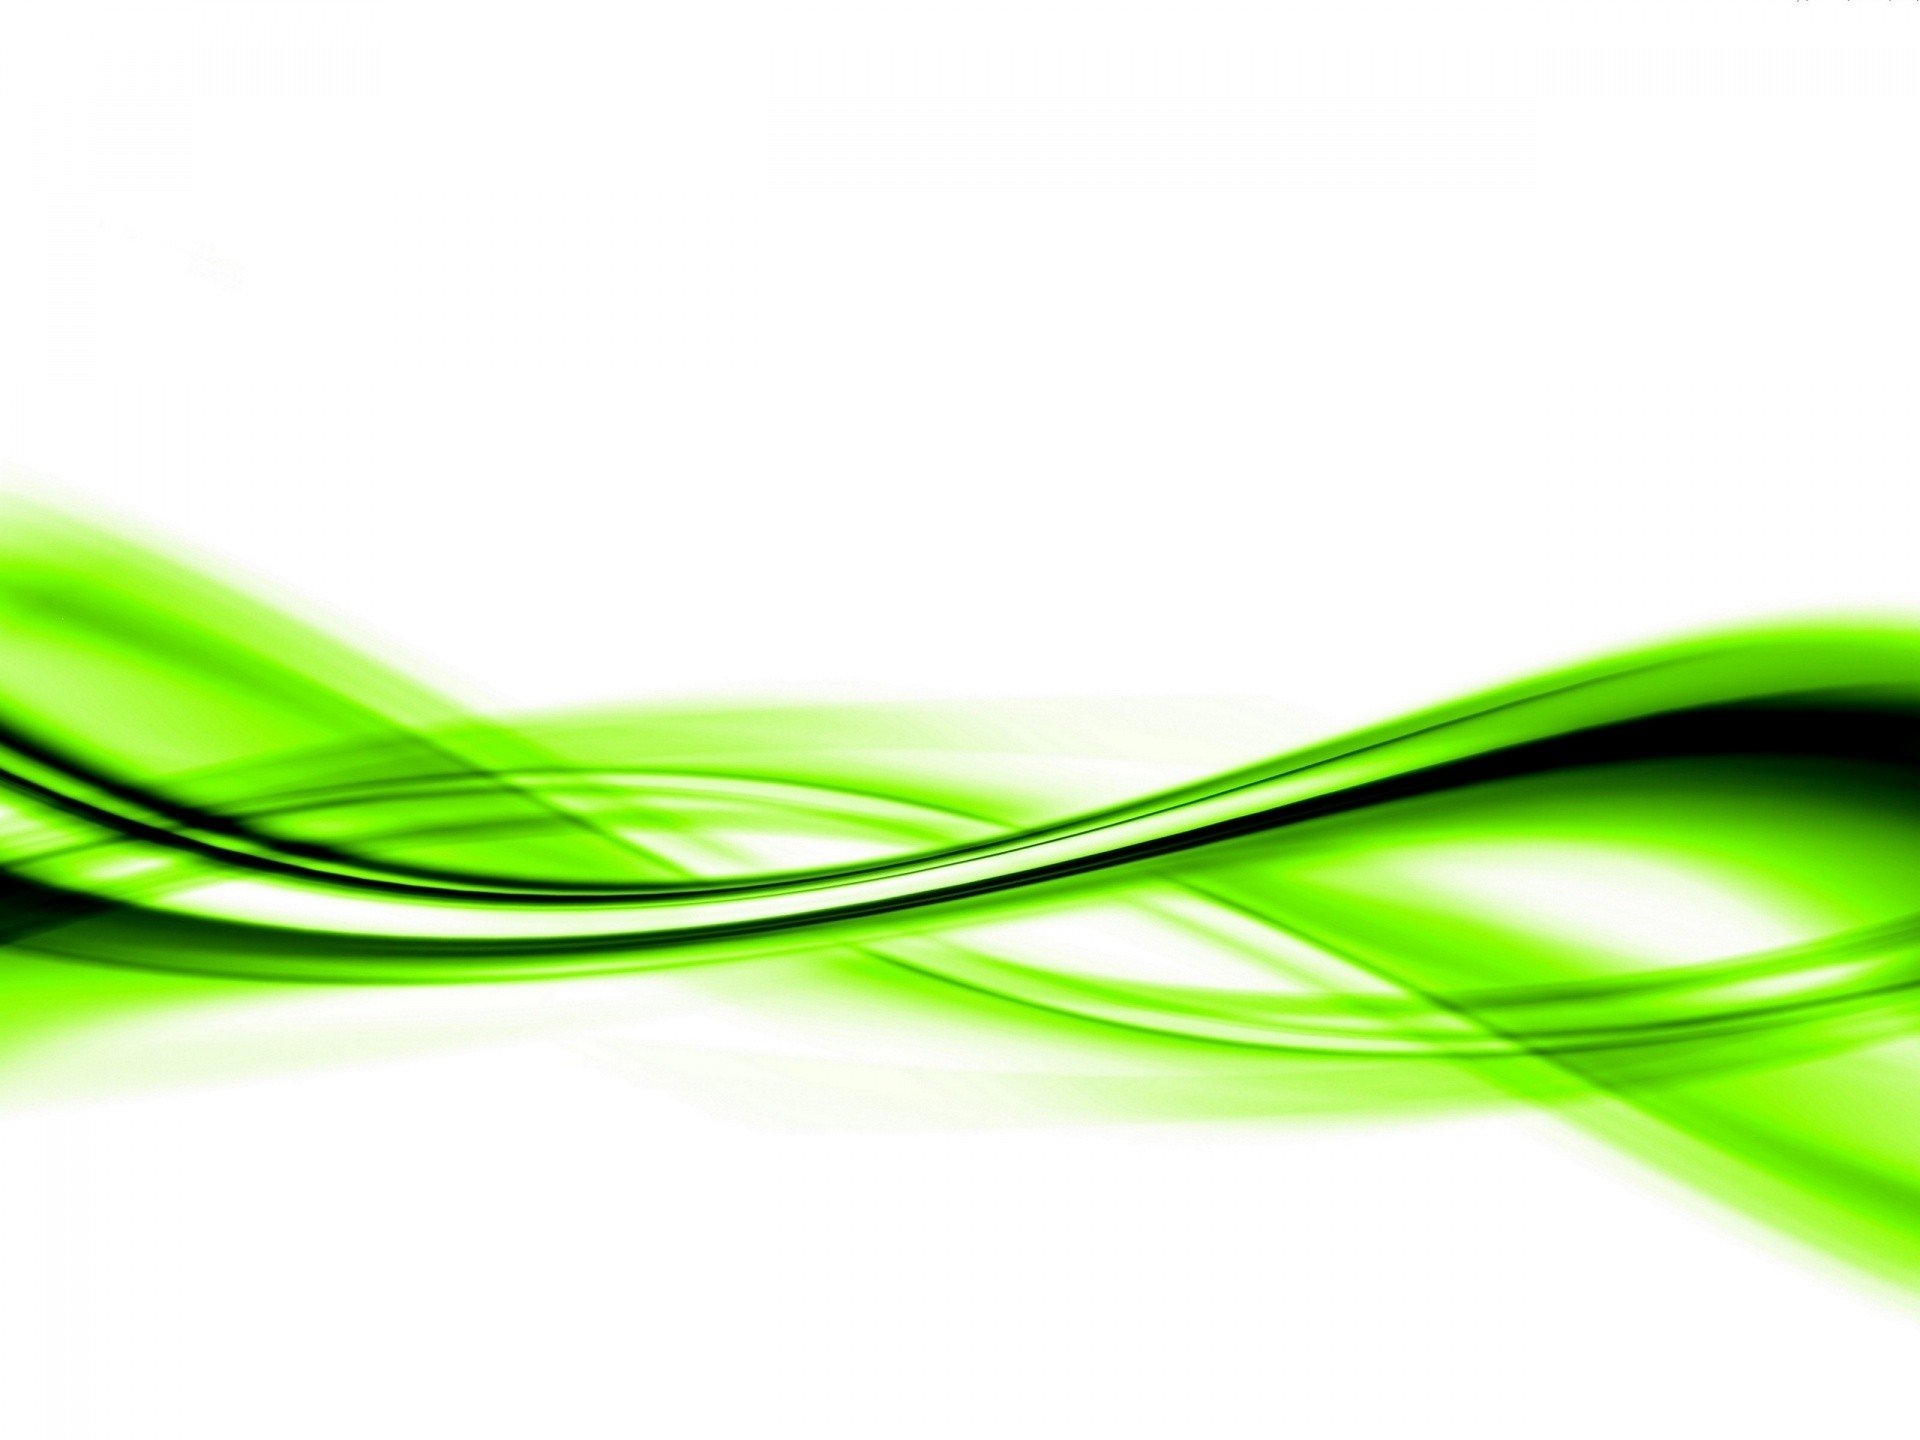 Free download Green Abstract Wallpaper 1920x1440 Green Abstract Colorful Waves [1920x1440] for your Desktop, Mobile & Tablet. Explore Abstract Green Wallpaper. Green Computer Wallpaper, Cool Green Wallpaper, Green HD Wallpaper